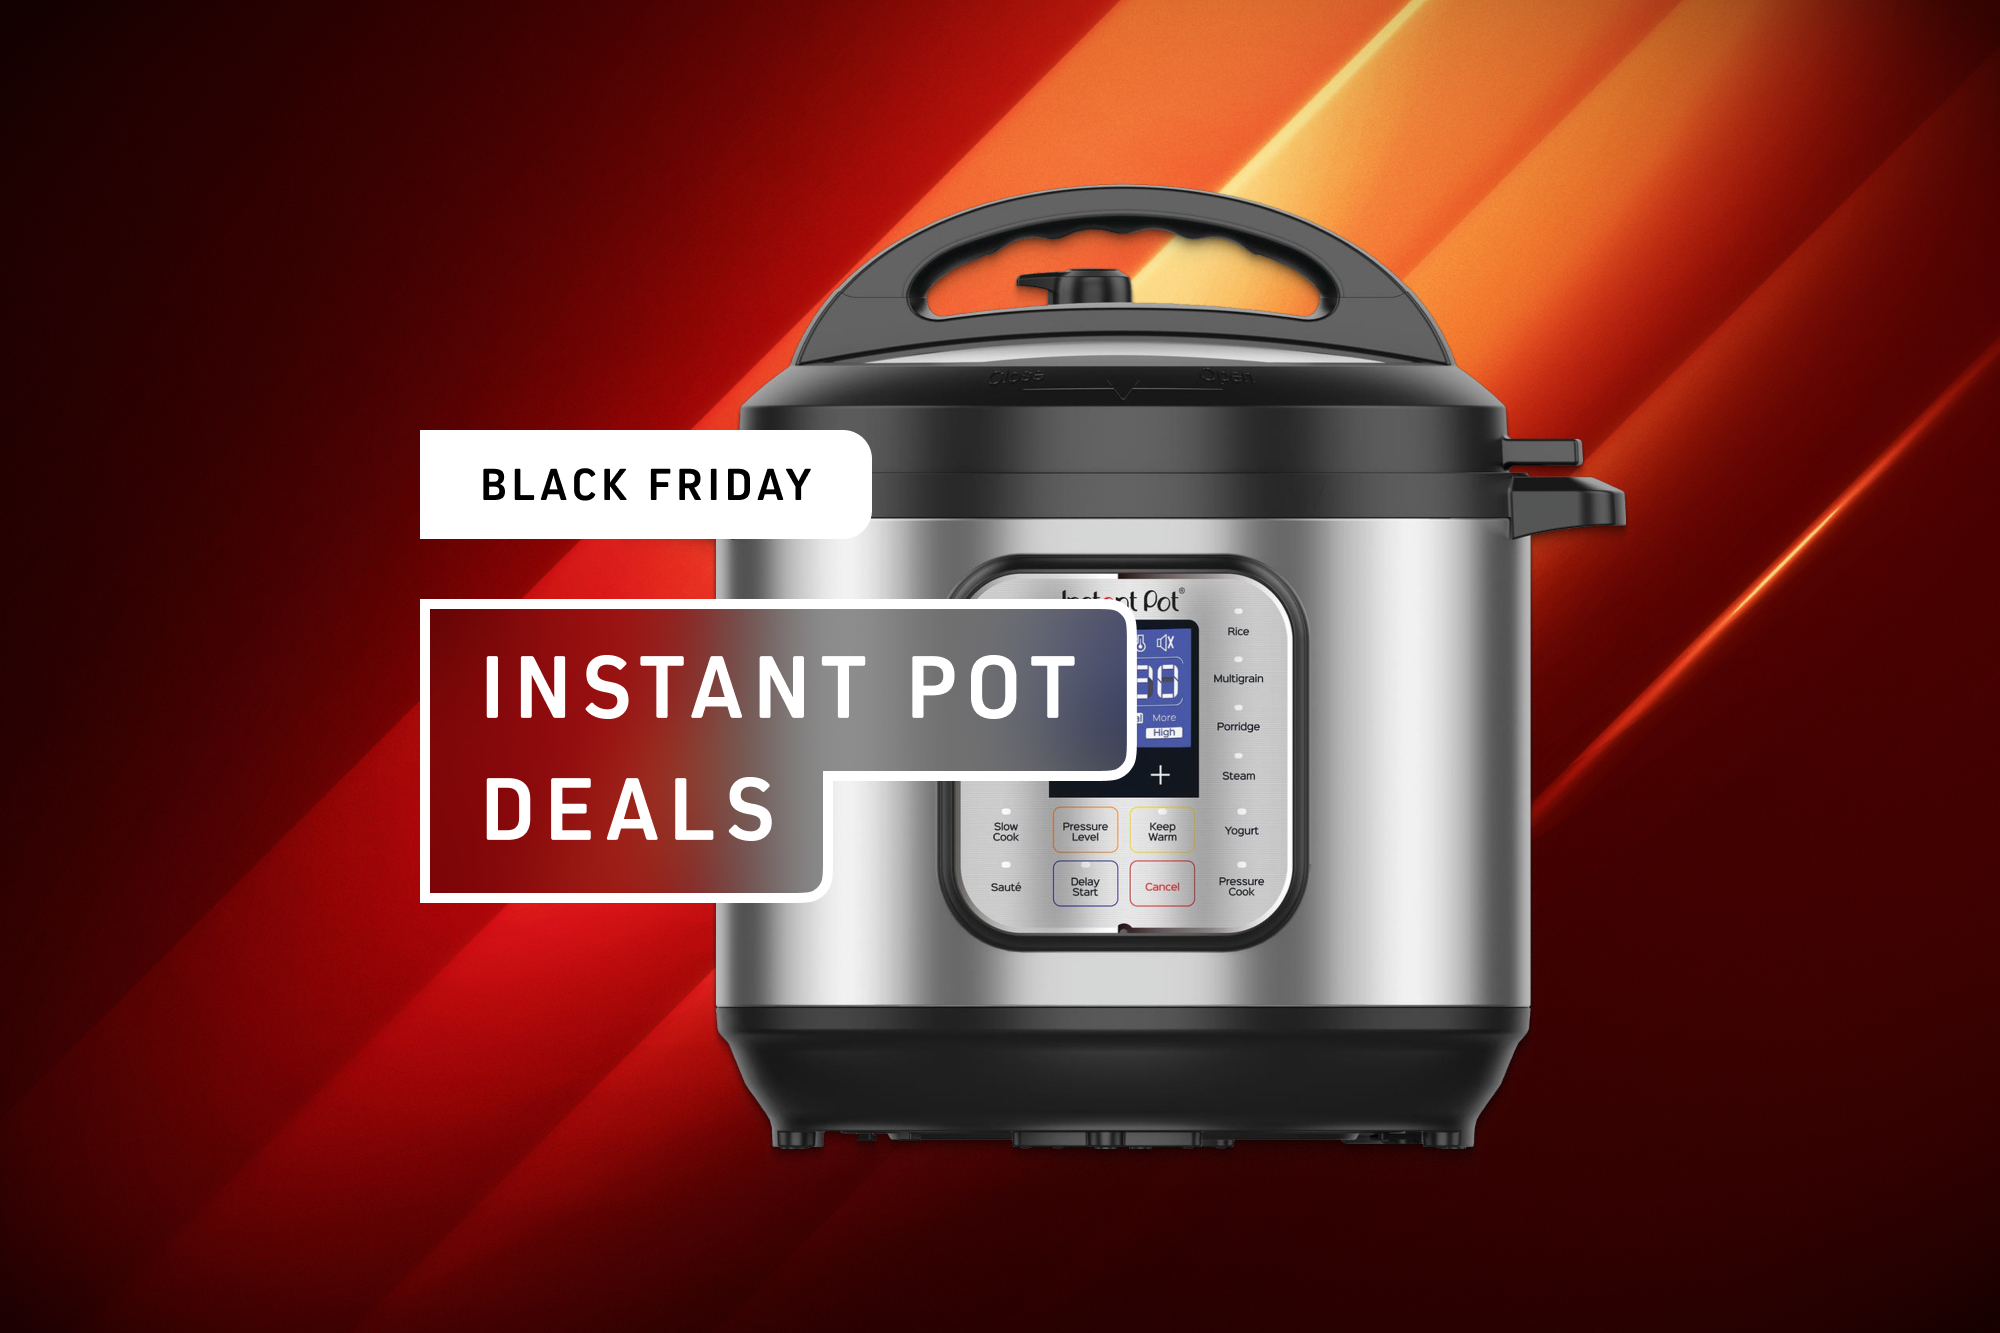 I bought an Instant Pot on Black Friday - do I regret it by  Prime  Day?